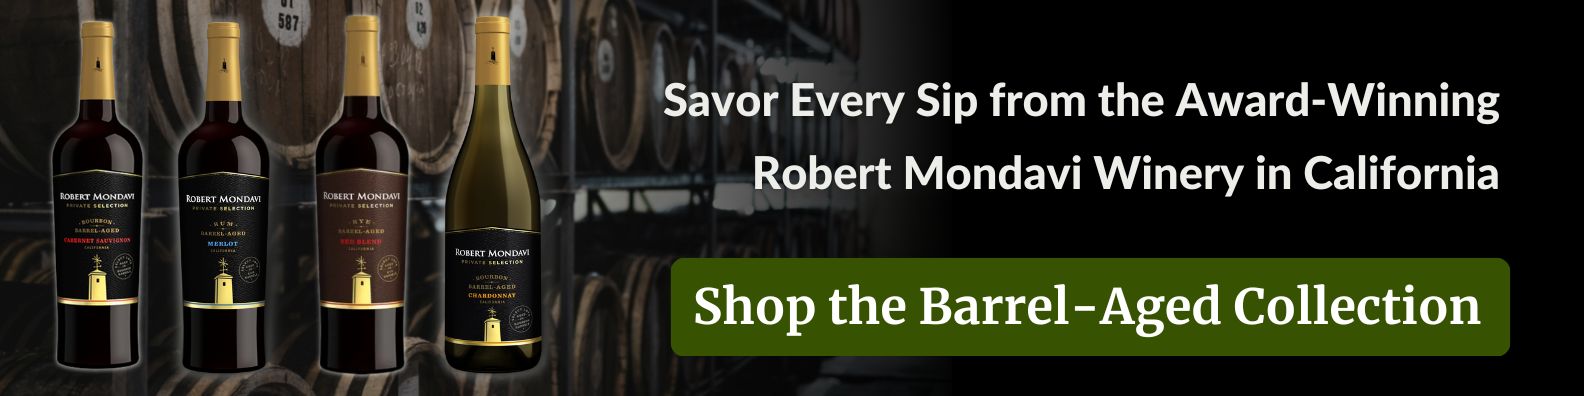 shop robert mondavi private selection barrel aged wines from california online in philippines